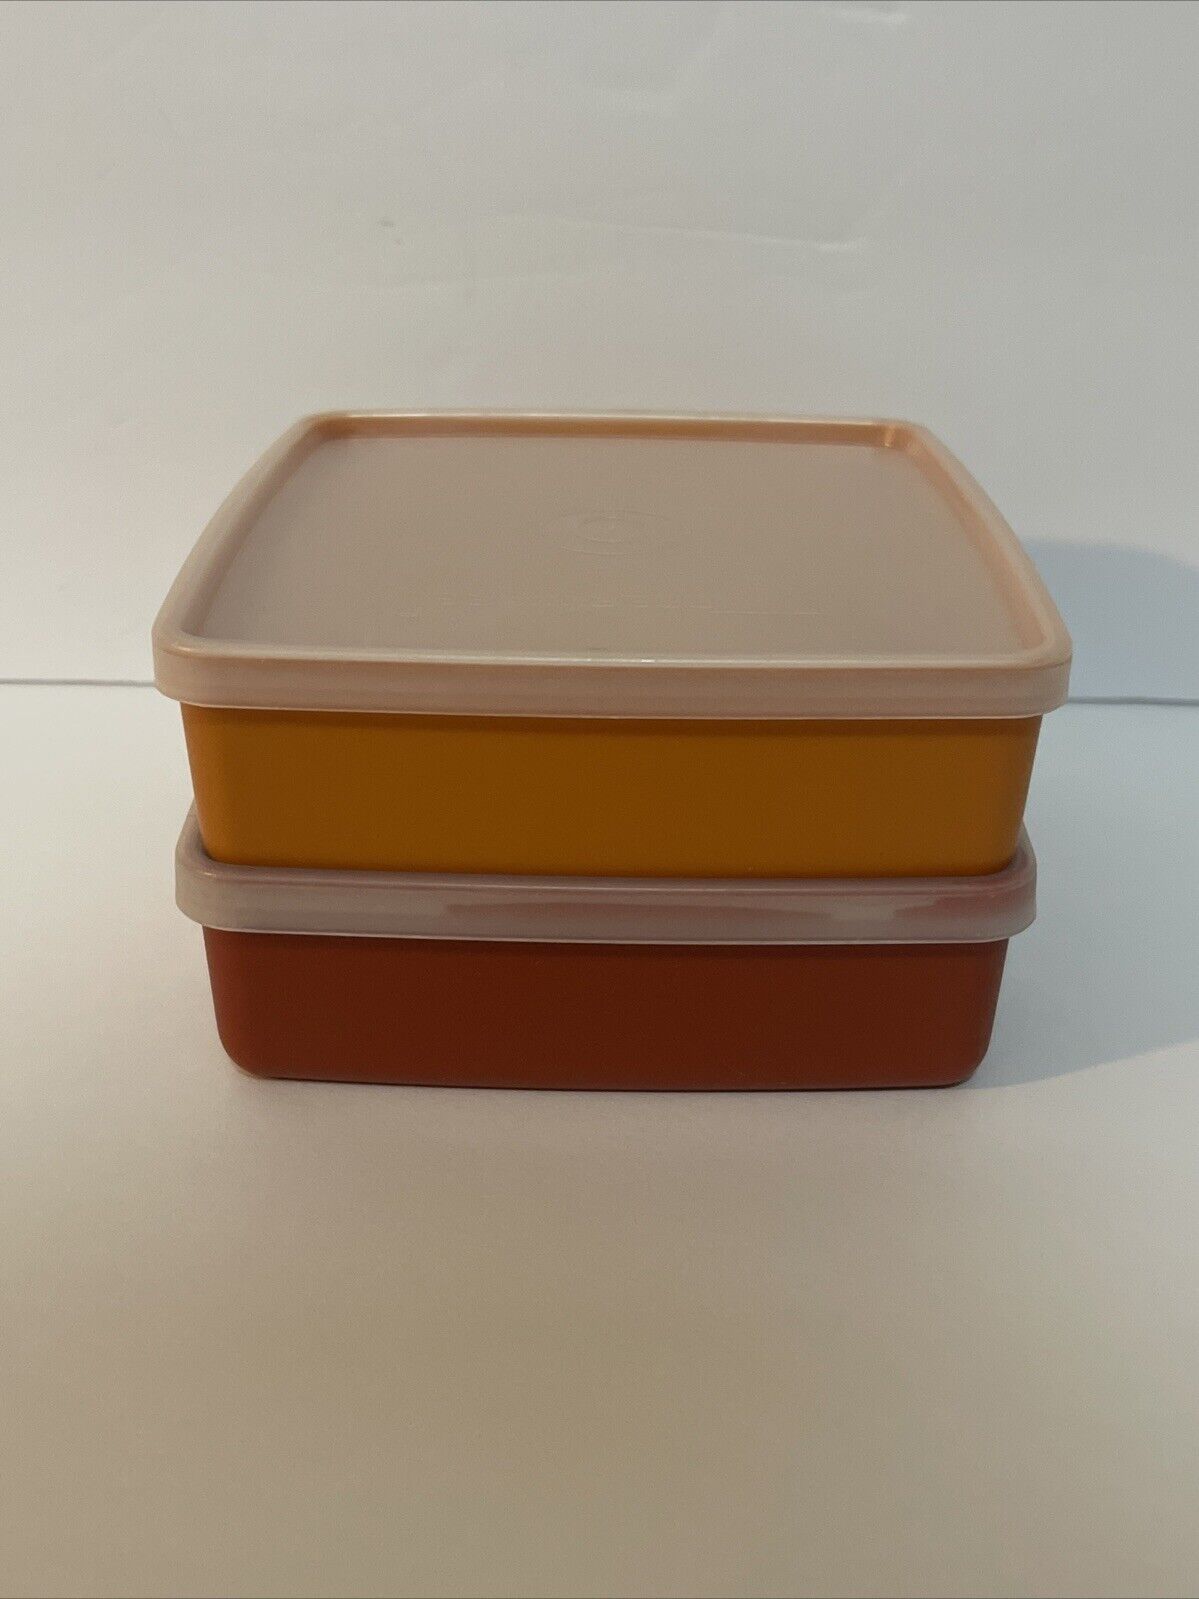 Vintage Tupperware Square Away Sandwich Container Red And Orange